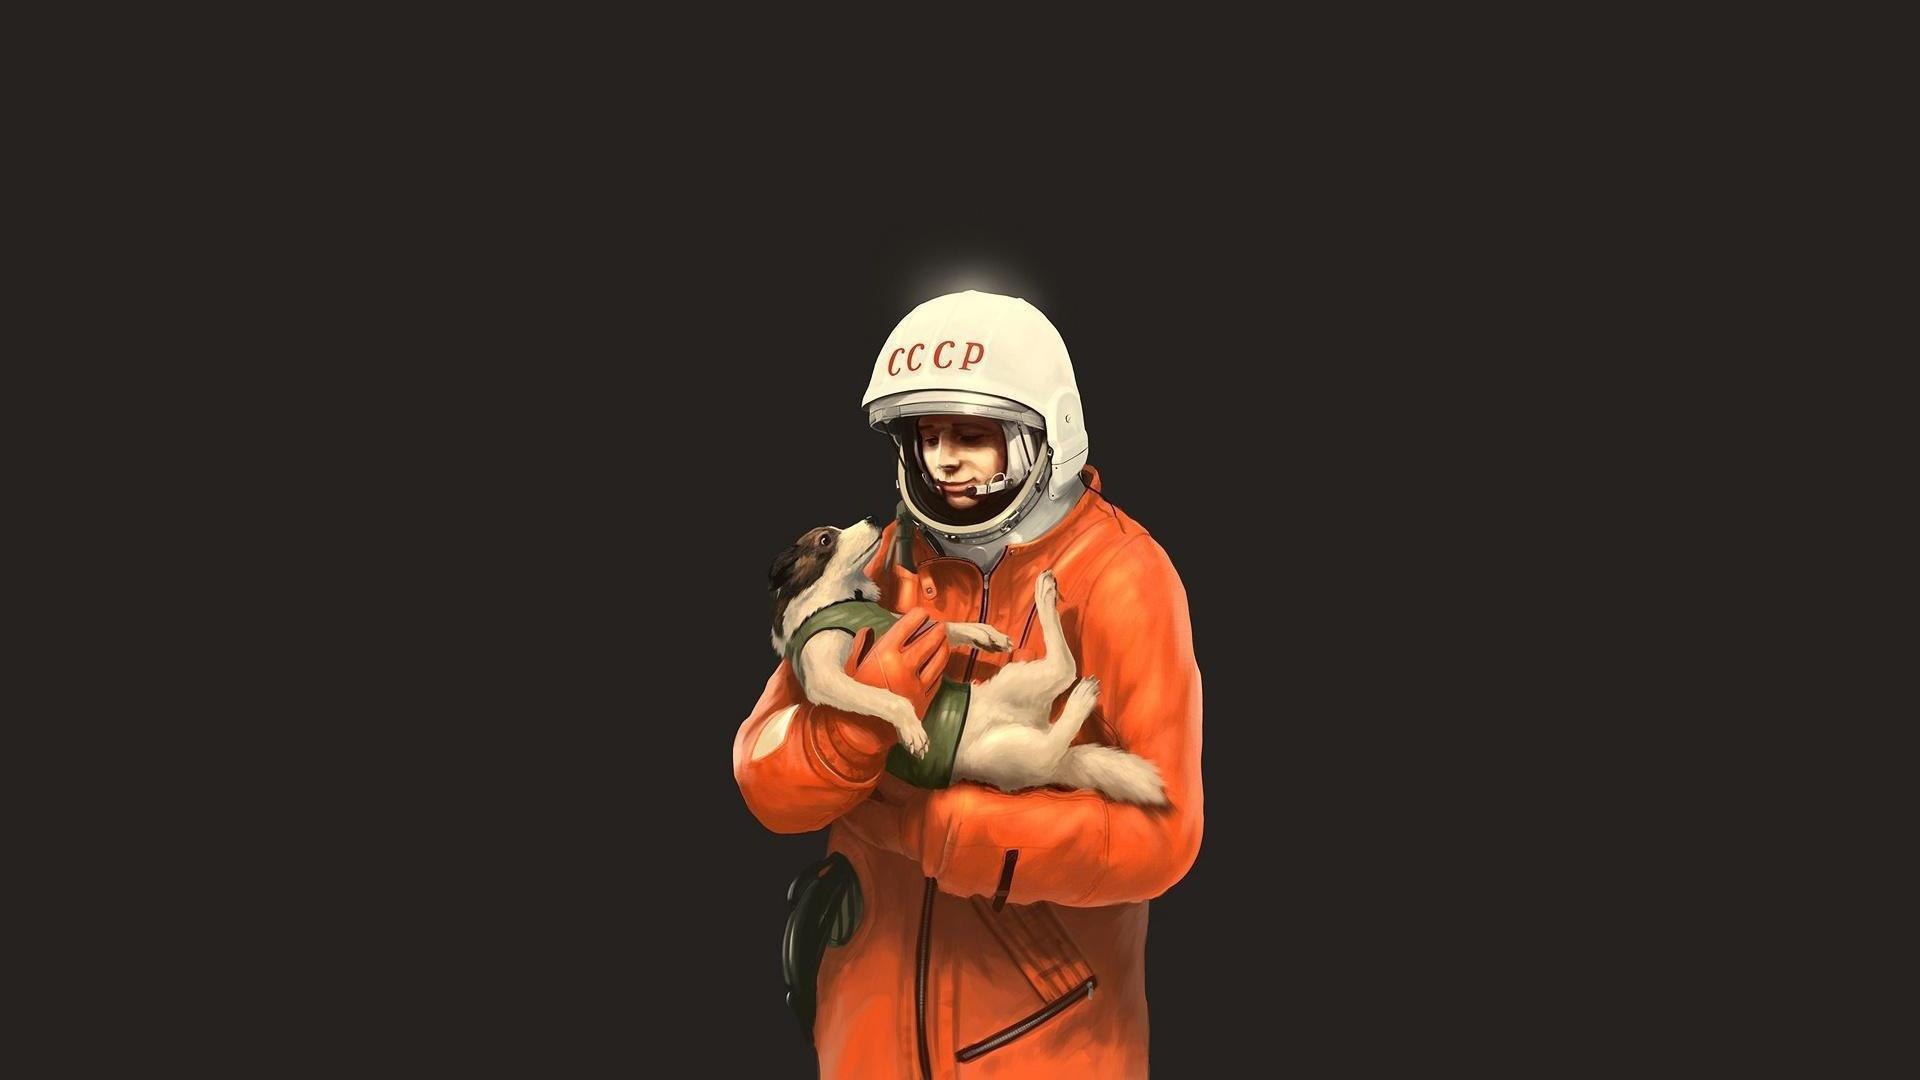 Laika the hands of Gagarin